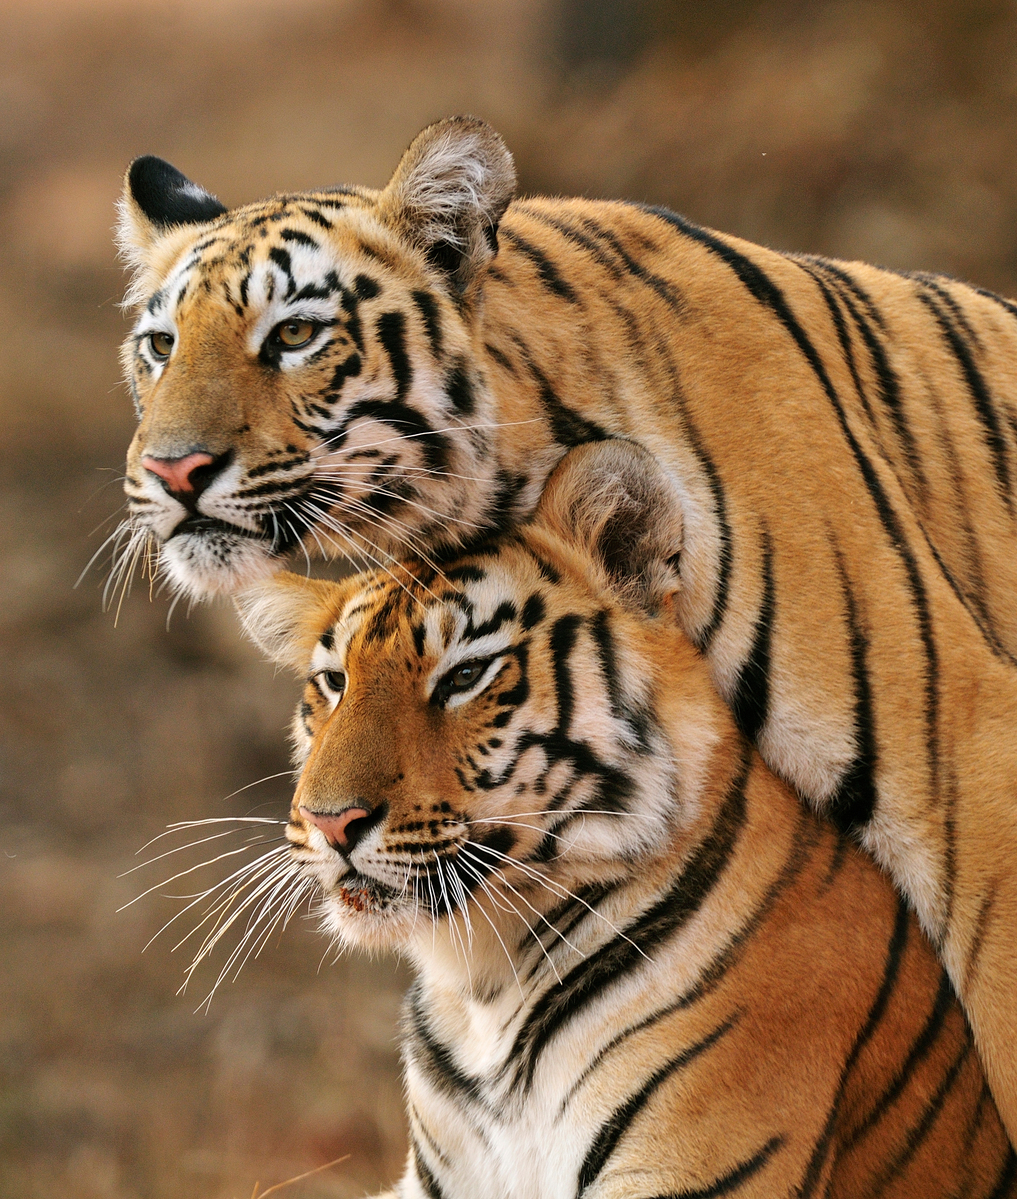 Tigers in Tadoba Reserve in India. © Harshad Barve